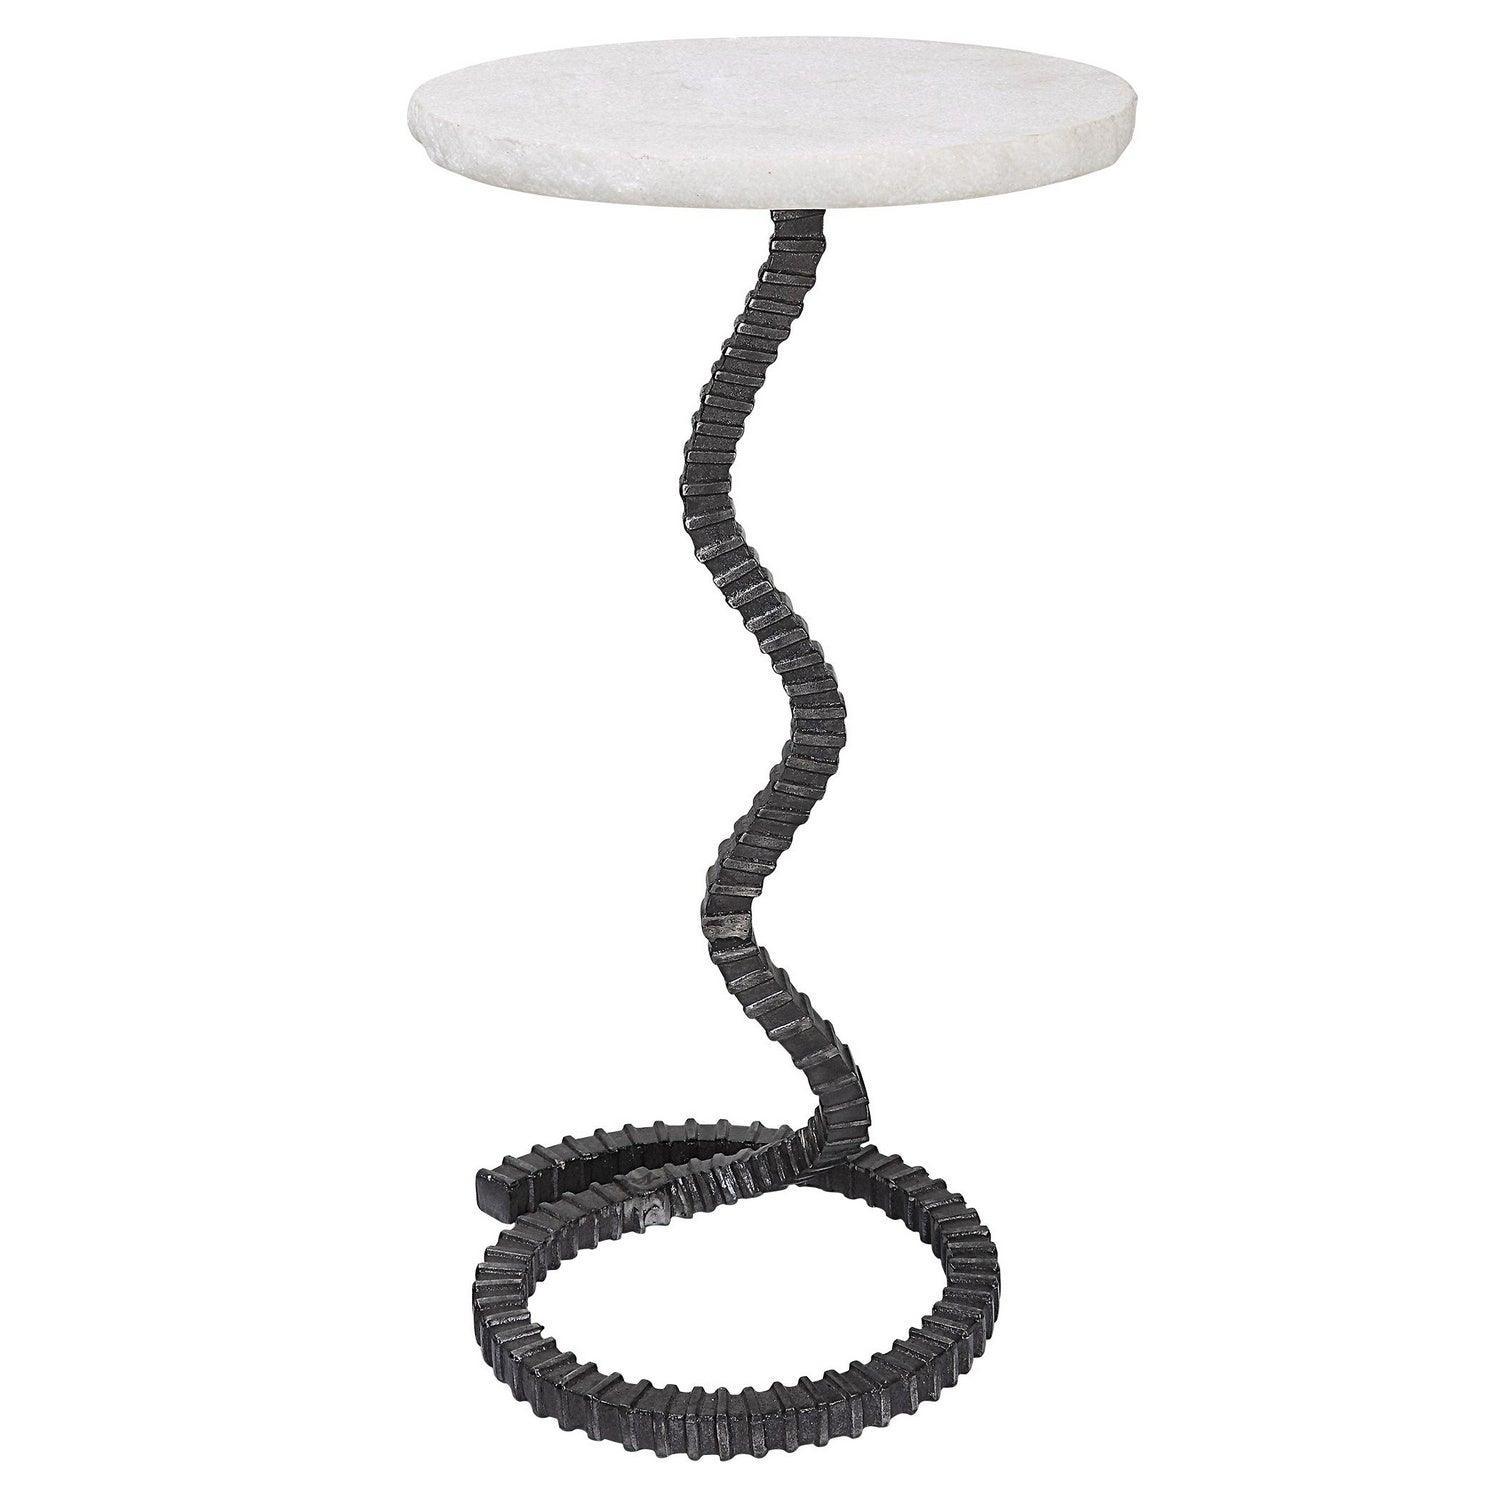 The Uttermost - Lasso Drink Table - 25143 | Montreal Lighting & Hardware